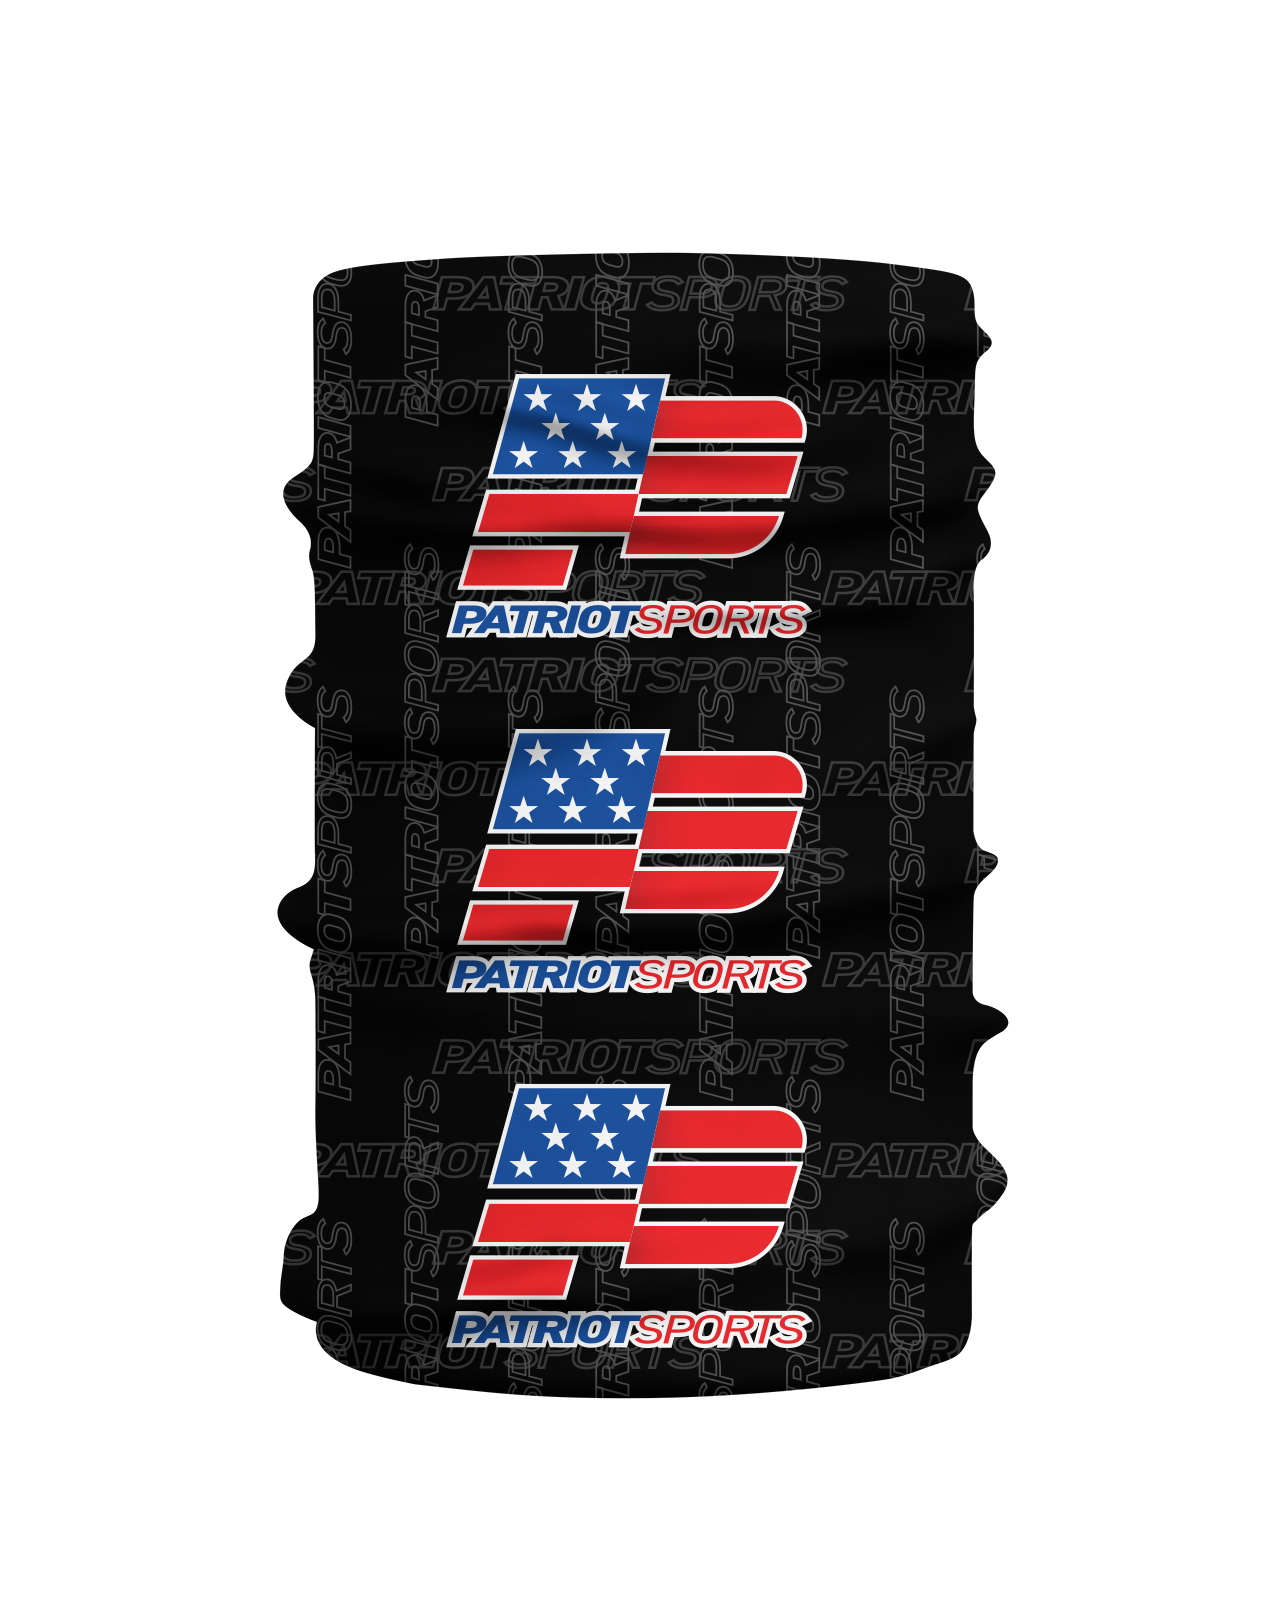 Patriot Sports  Sideline Gaiter (Multipurpose Face Mask)  Front   View  in black  with   Ultra HD Graphic  design, lightweight , breathable and  you will feel comfortable     